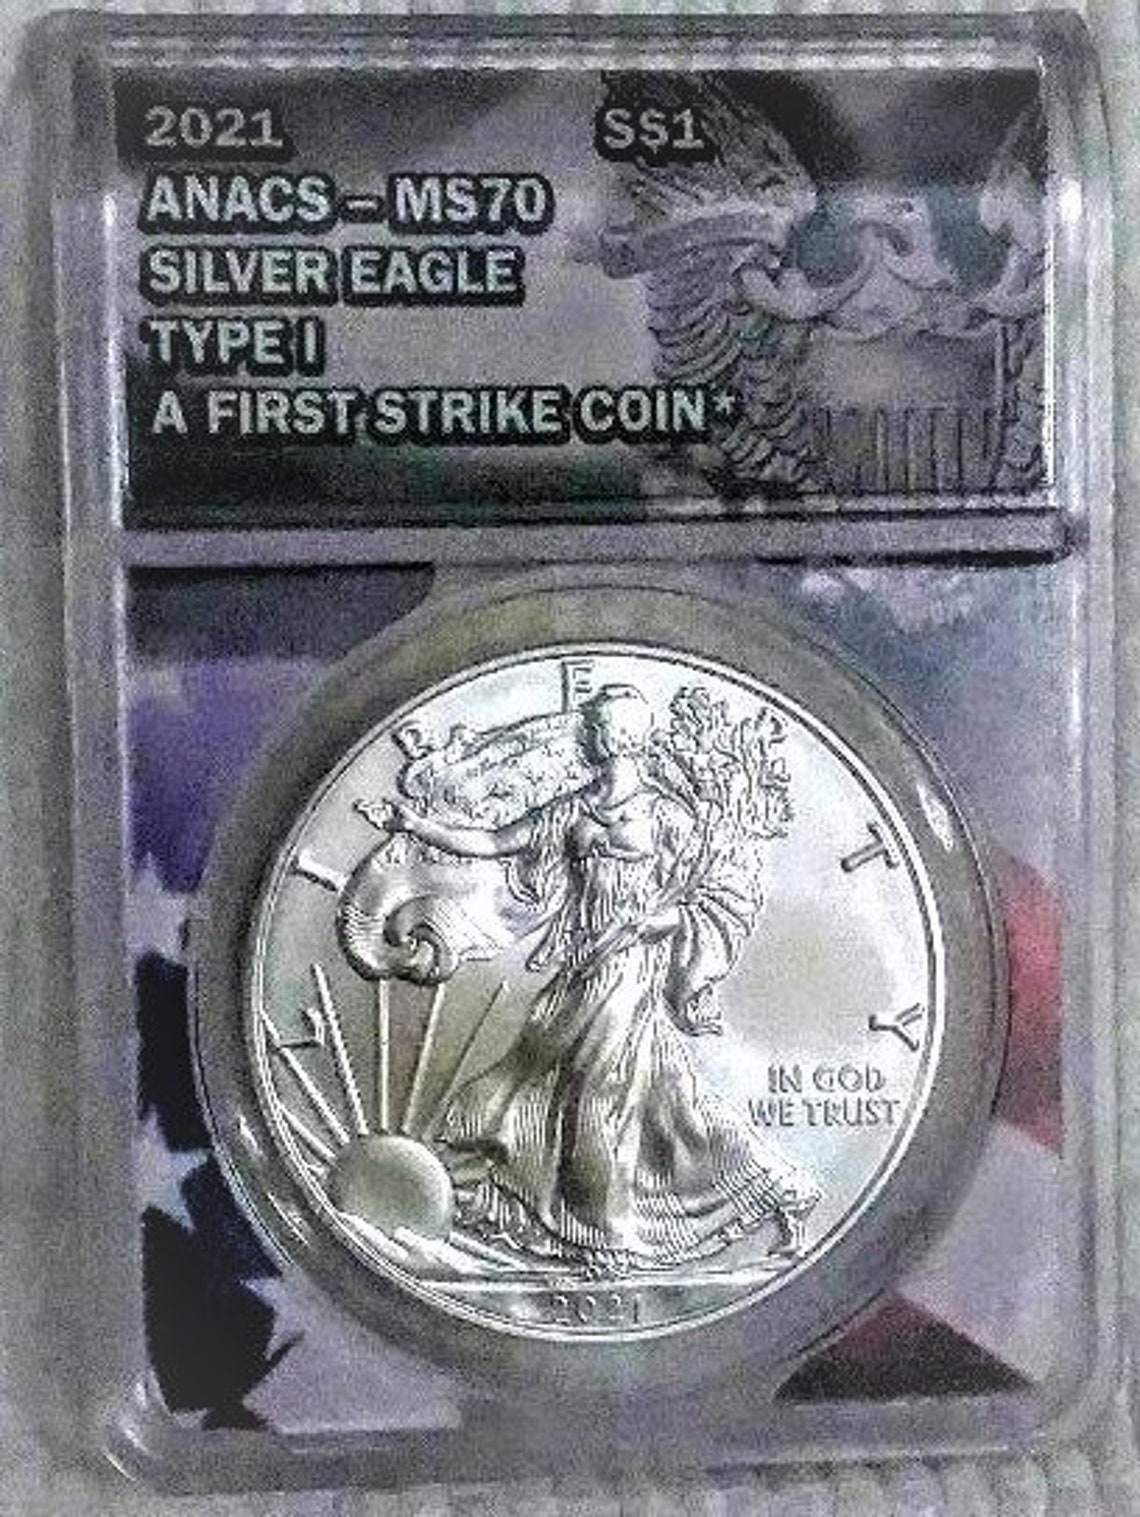 First Strike 2021 MS70 Silver Eagle Type 1 ANACSSuper Etsy